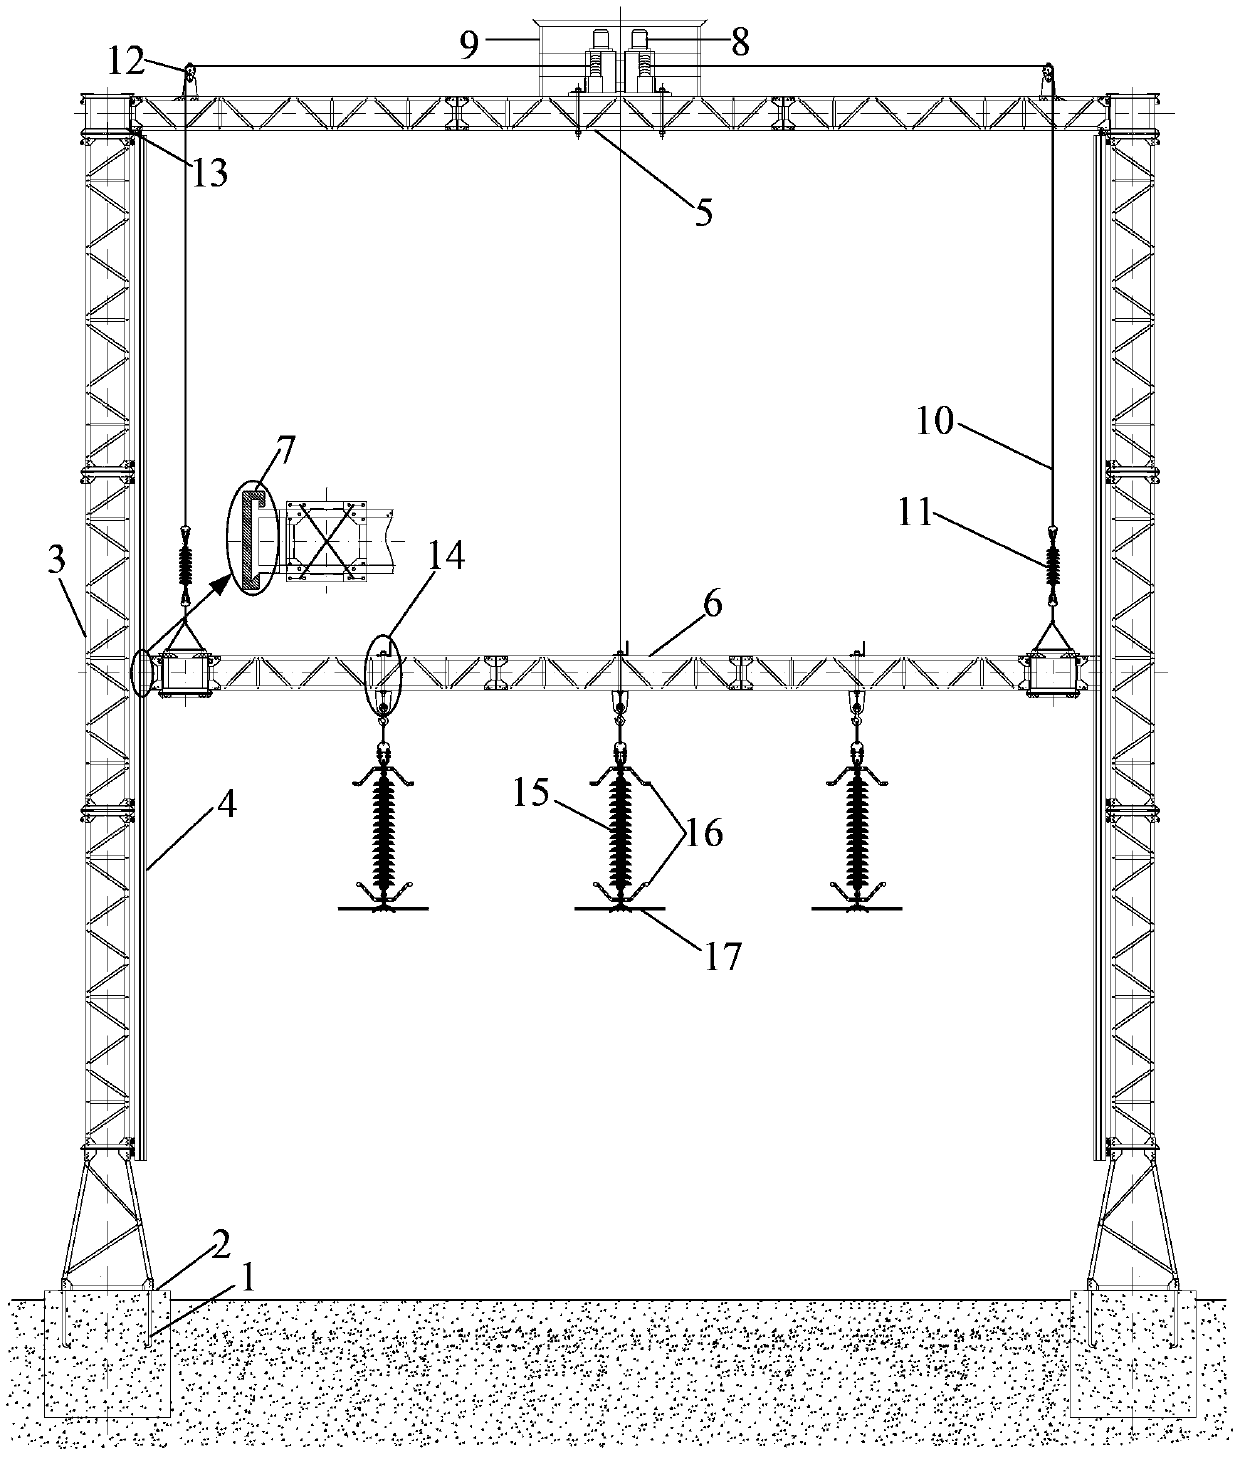 A portable test tower for testing the high-voltage performance of transmission line insulator strings